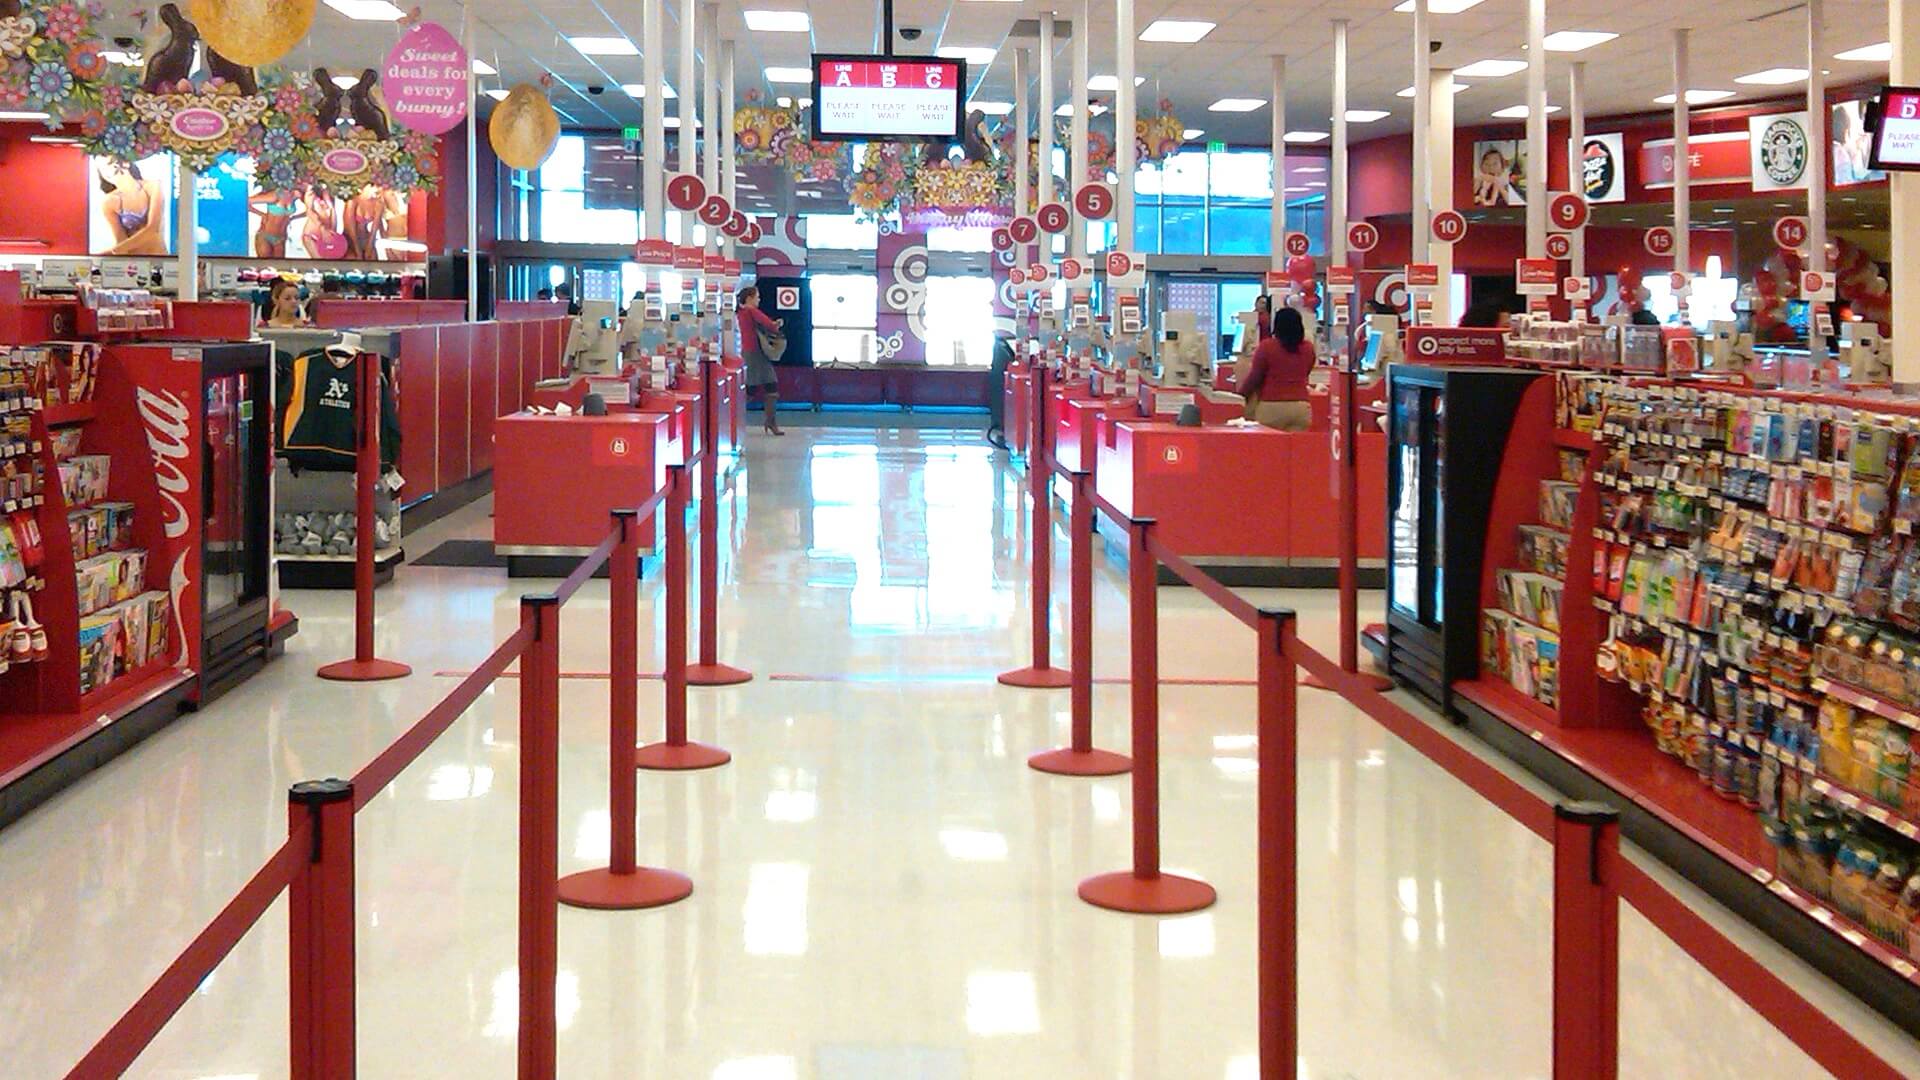 Retail,Queuing,Stanchions,QtracCF,StationLights,Technology